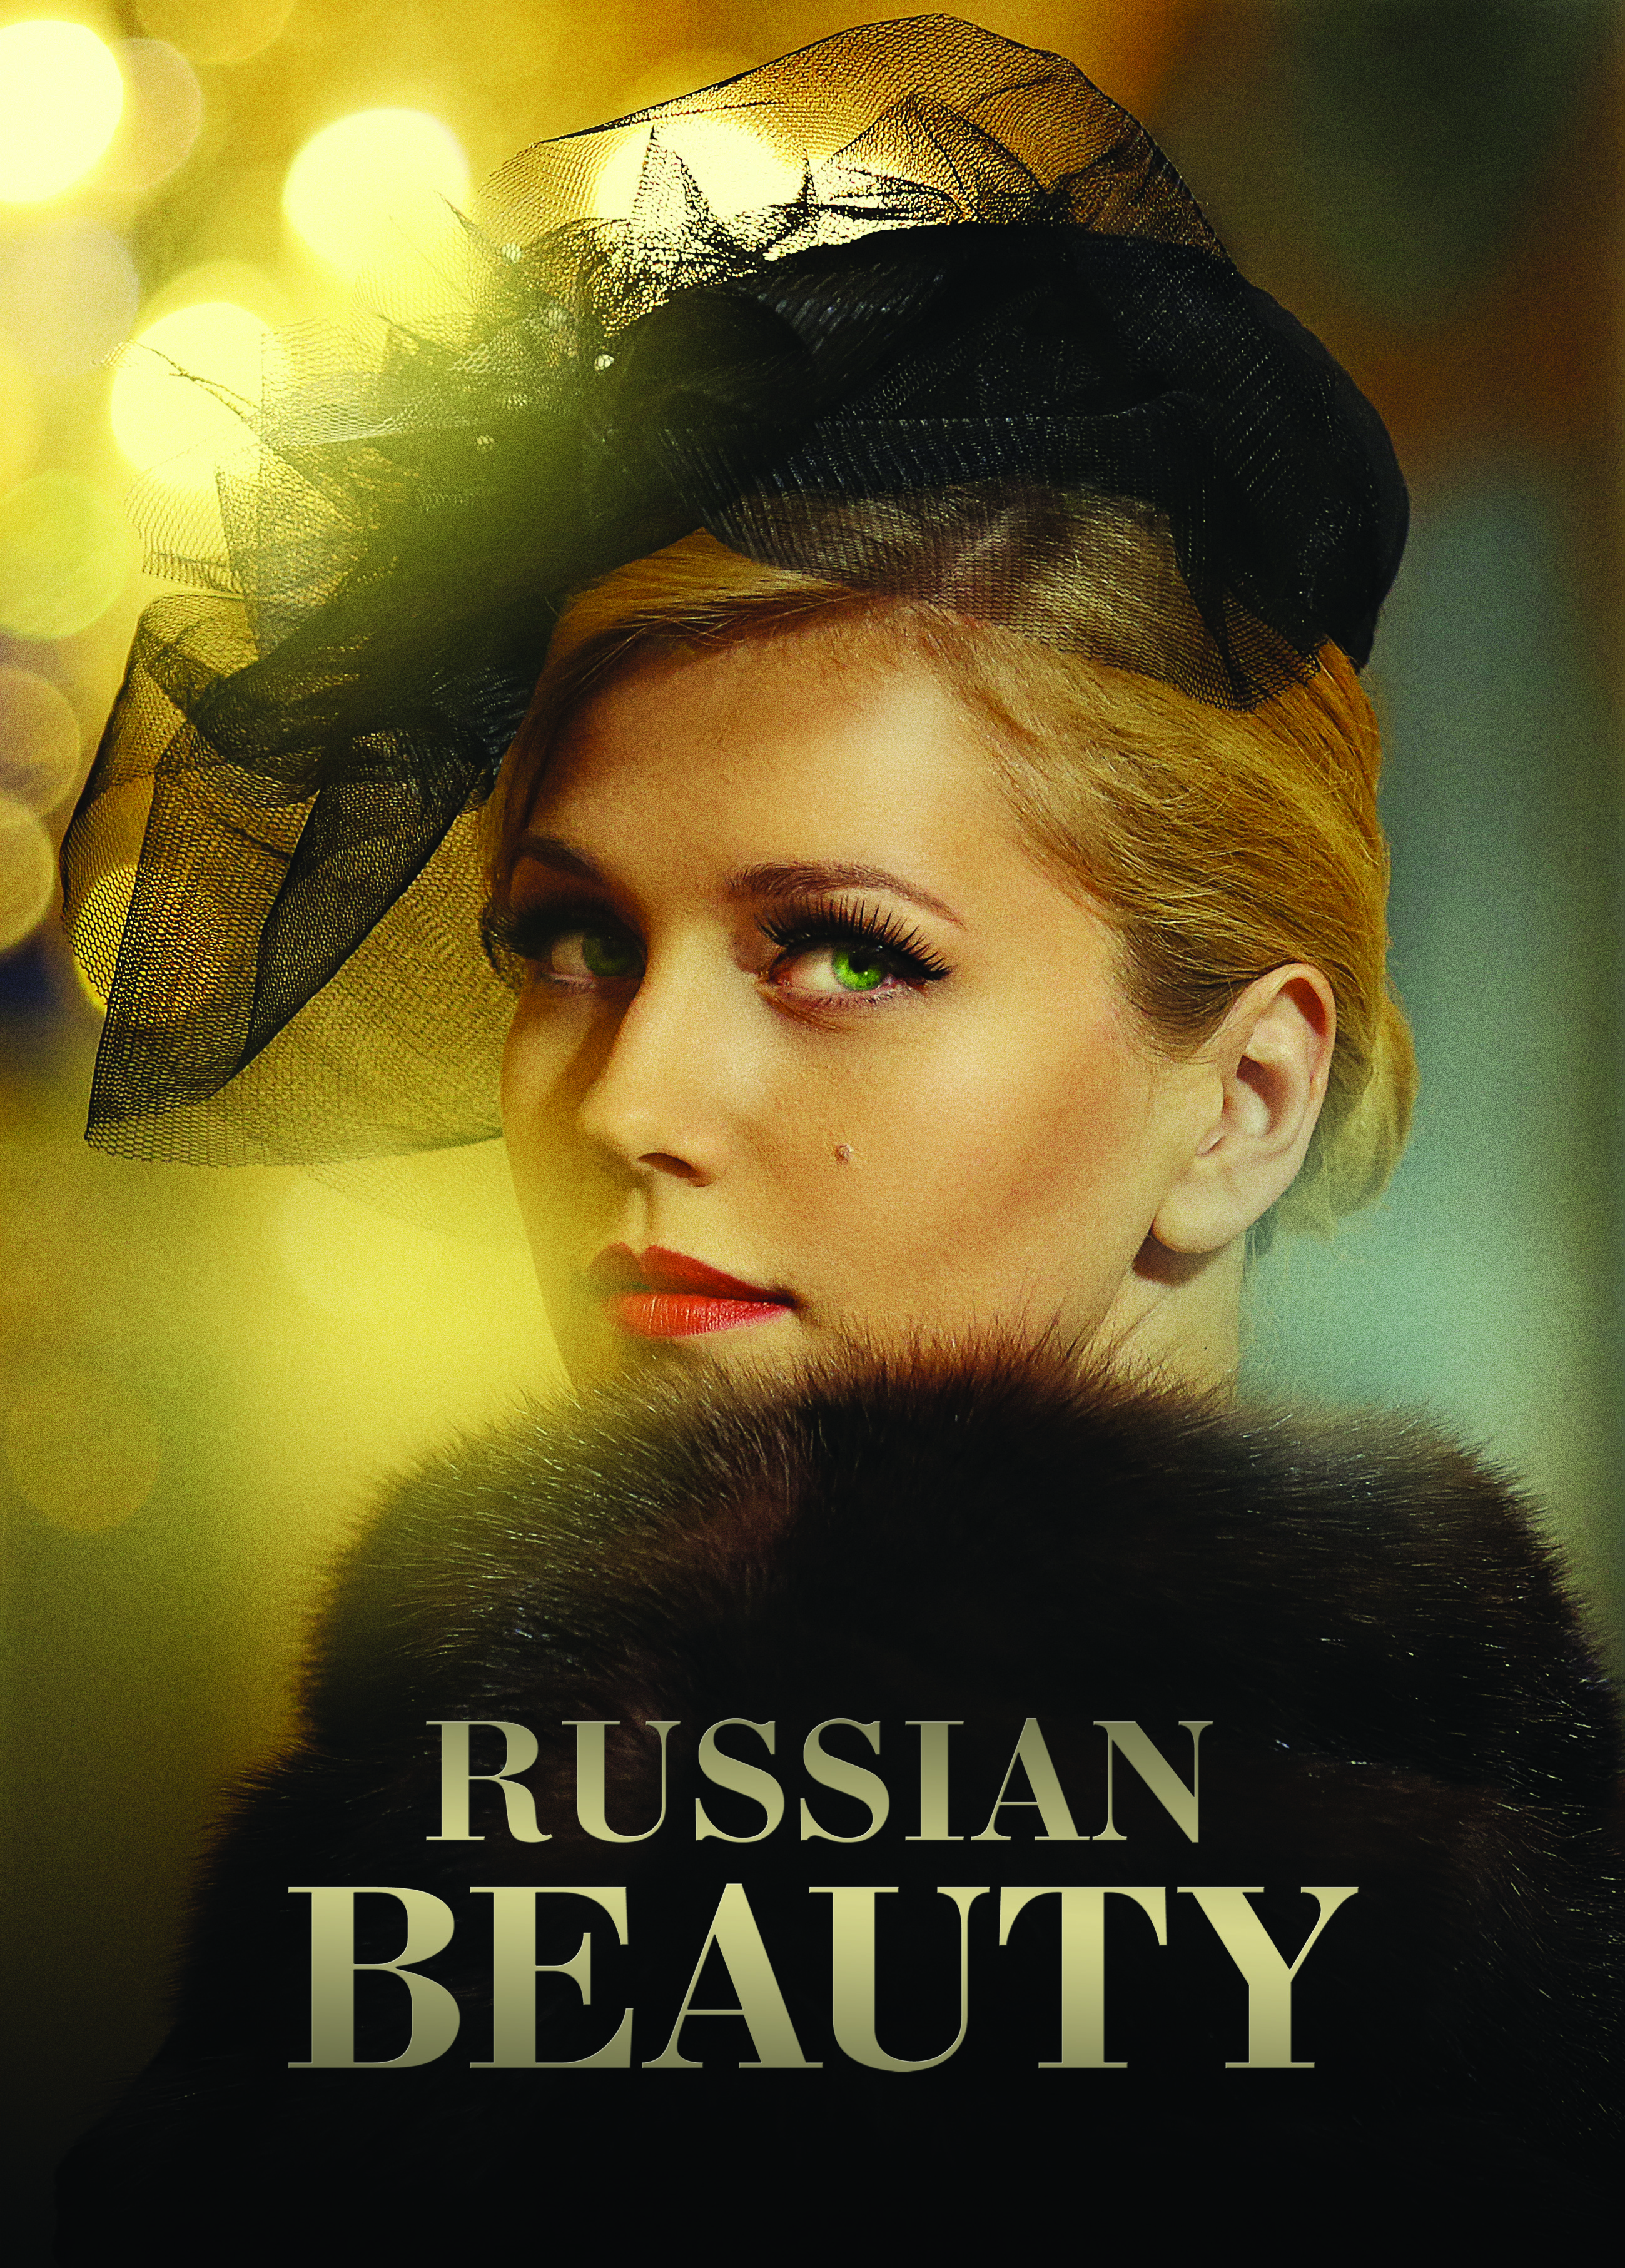 "RUSSIAN BEAUTY" IS BACK IN CHINA